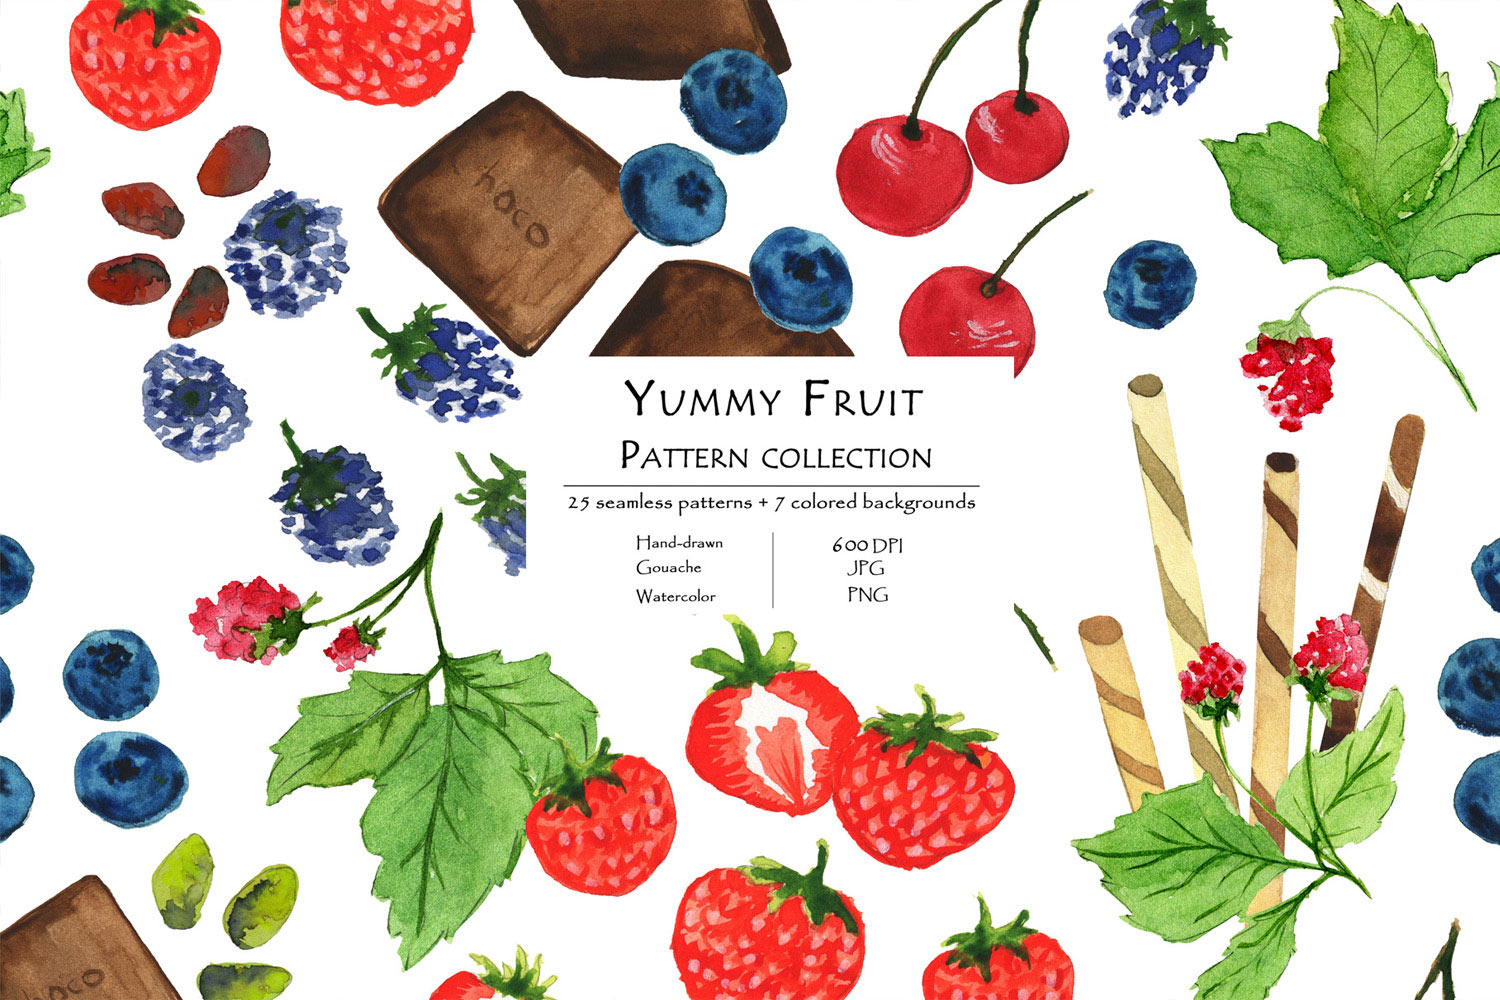 Yummy Fruit Pattern Collection With 25 Seamless Patterns And 7 Backgrounds Fruit Pattern Example.